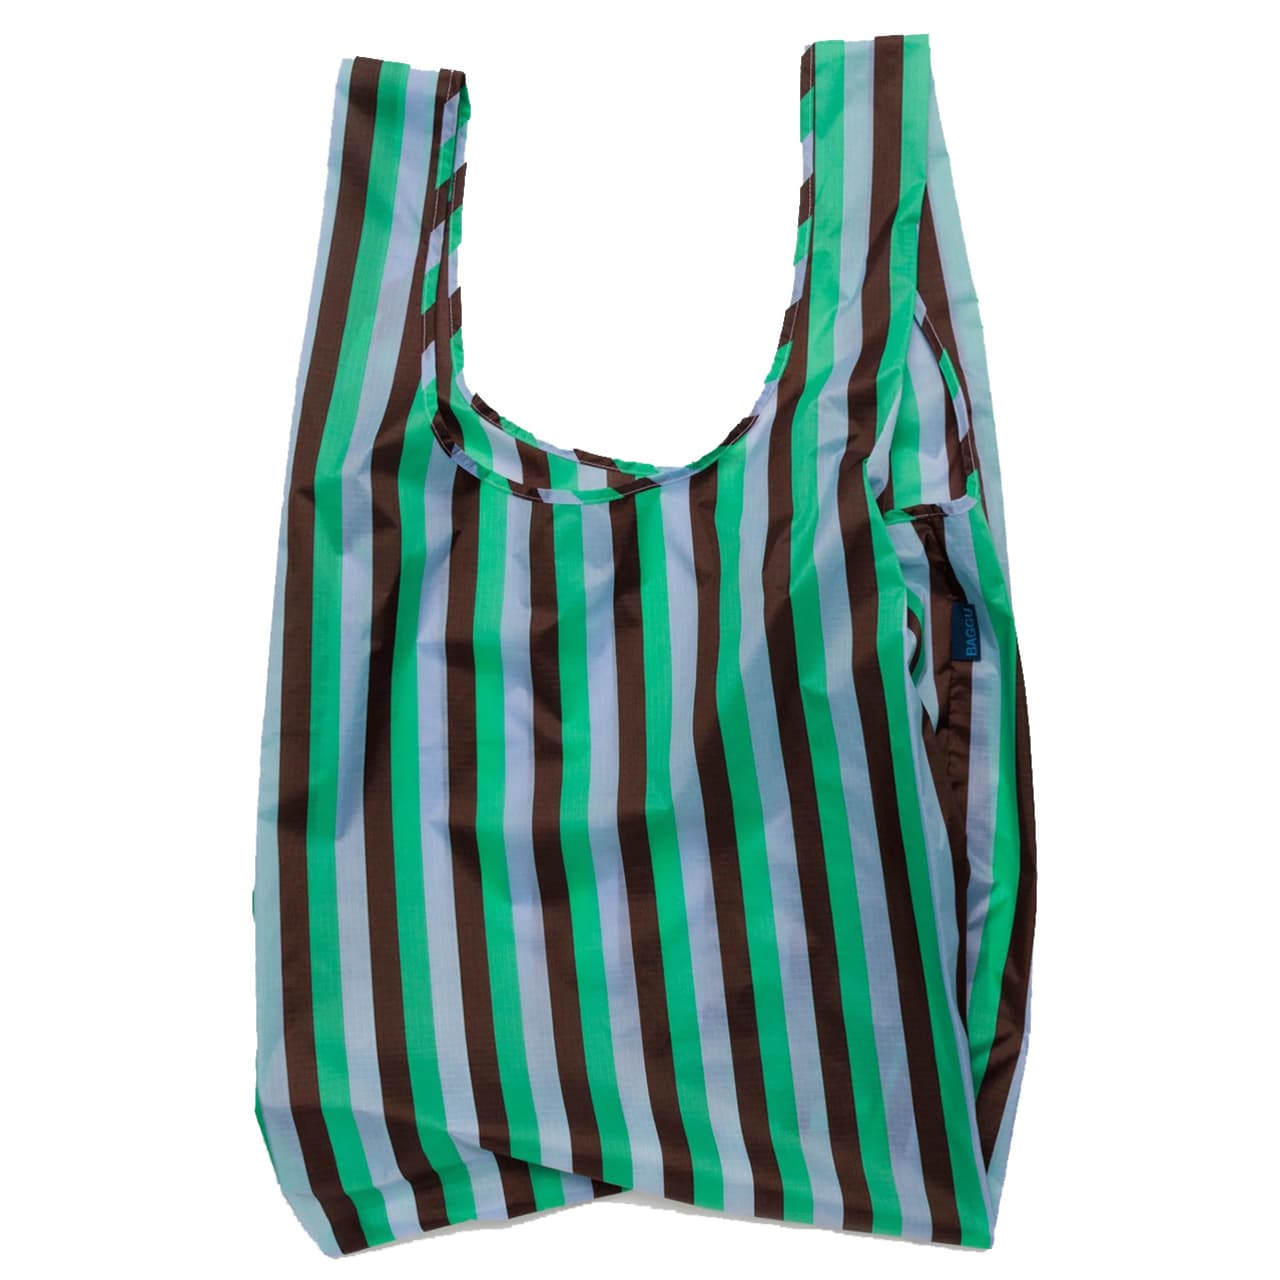 Gifts Under $25. - The Stripe